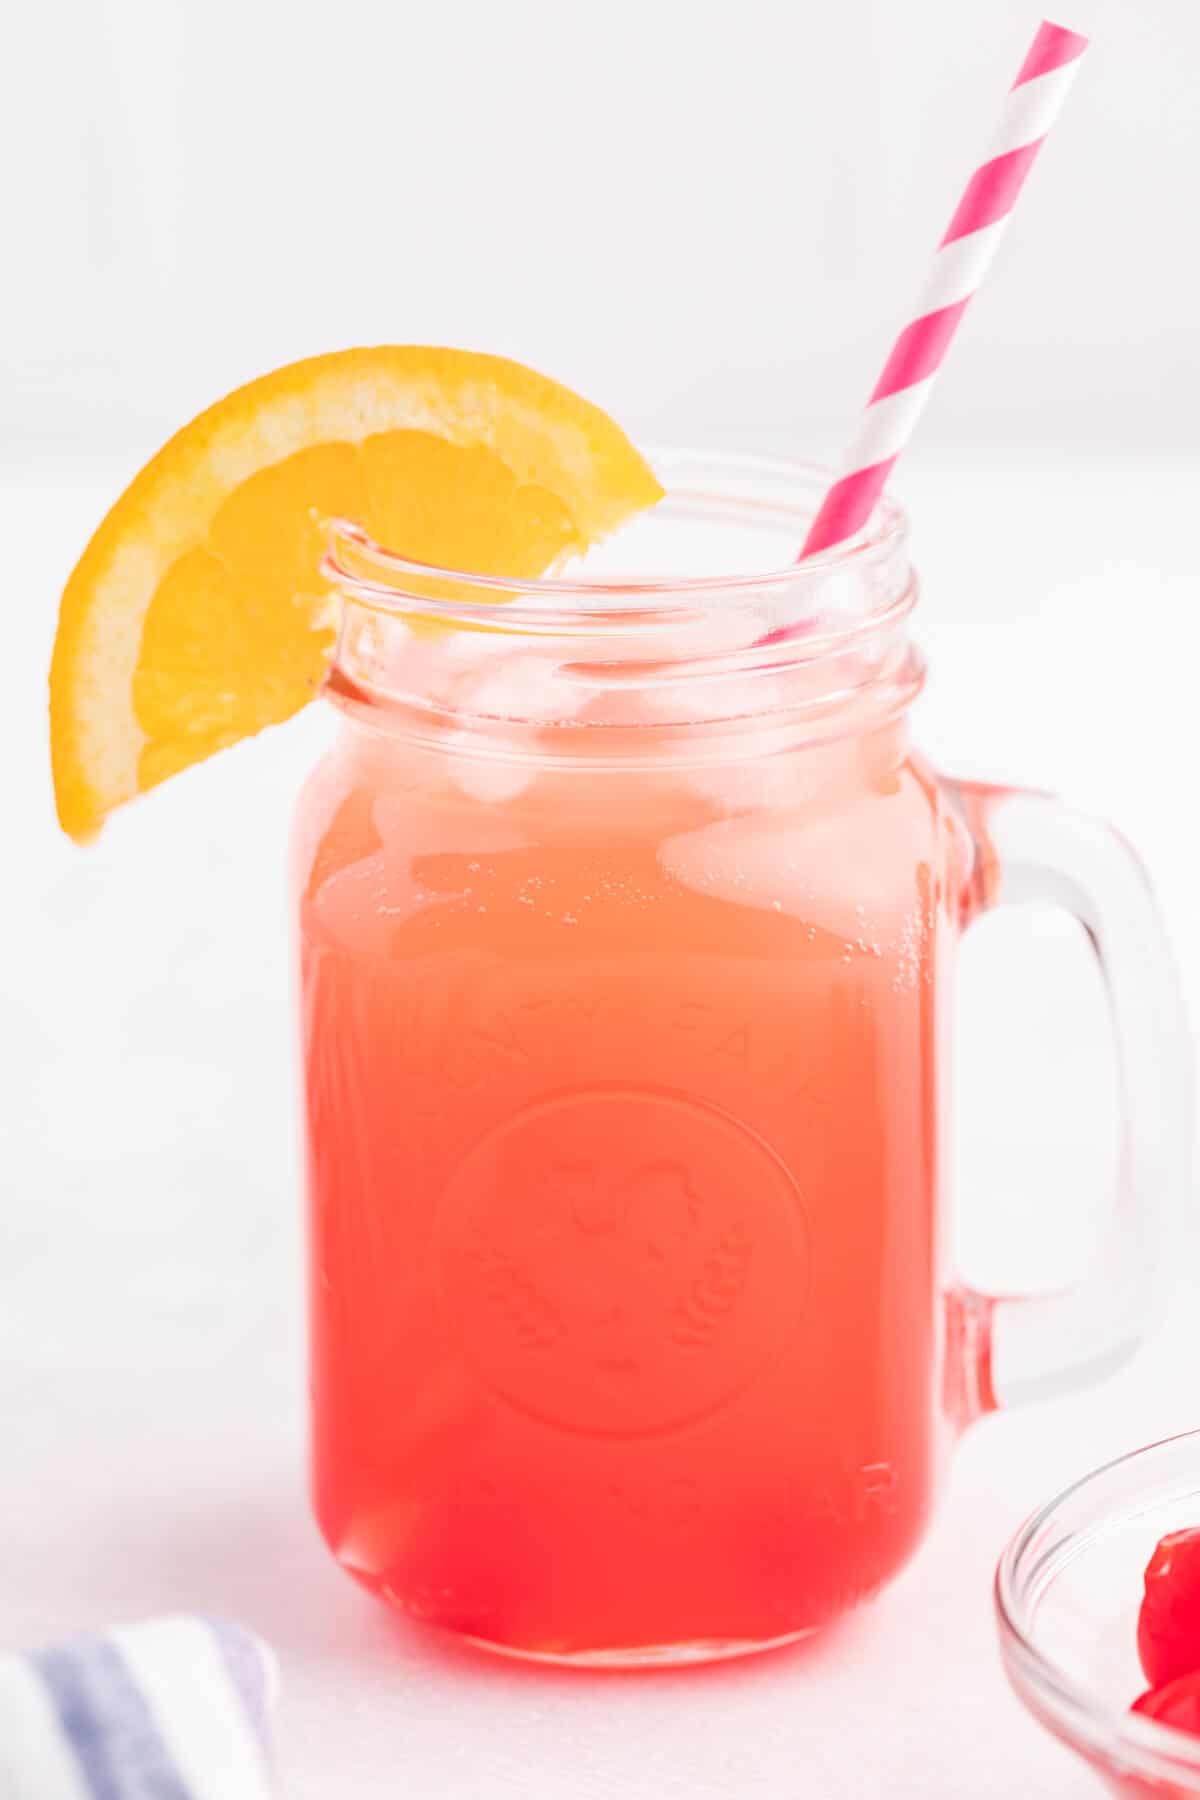 A shirley temple drink in a glass mug with a straw and an orange slice for garnish.